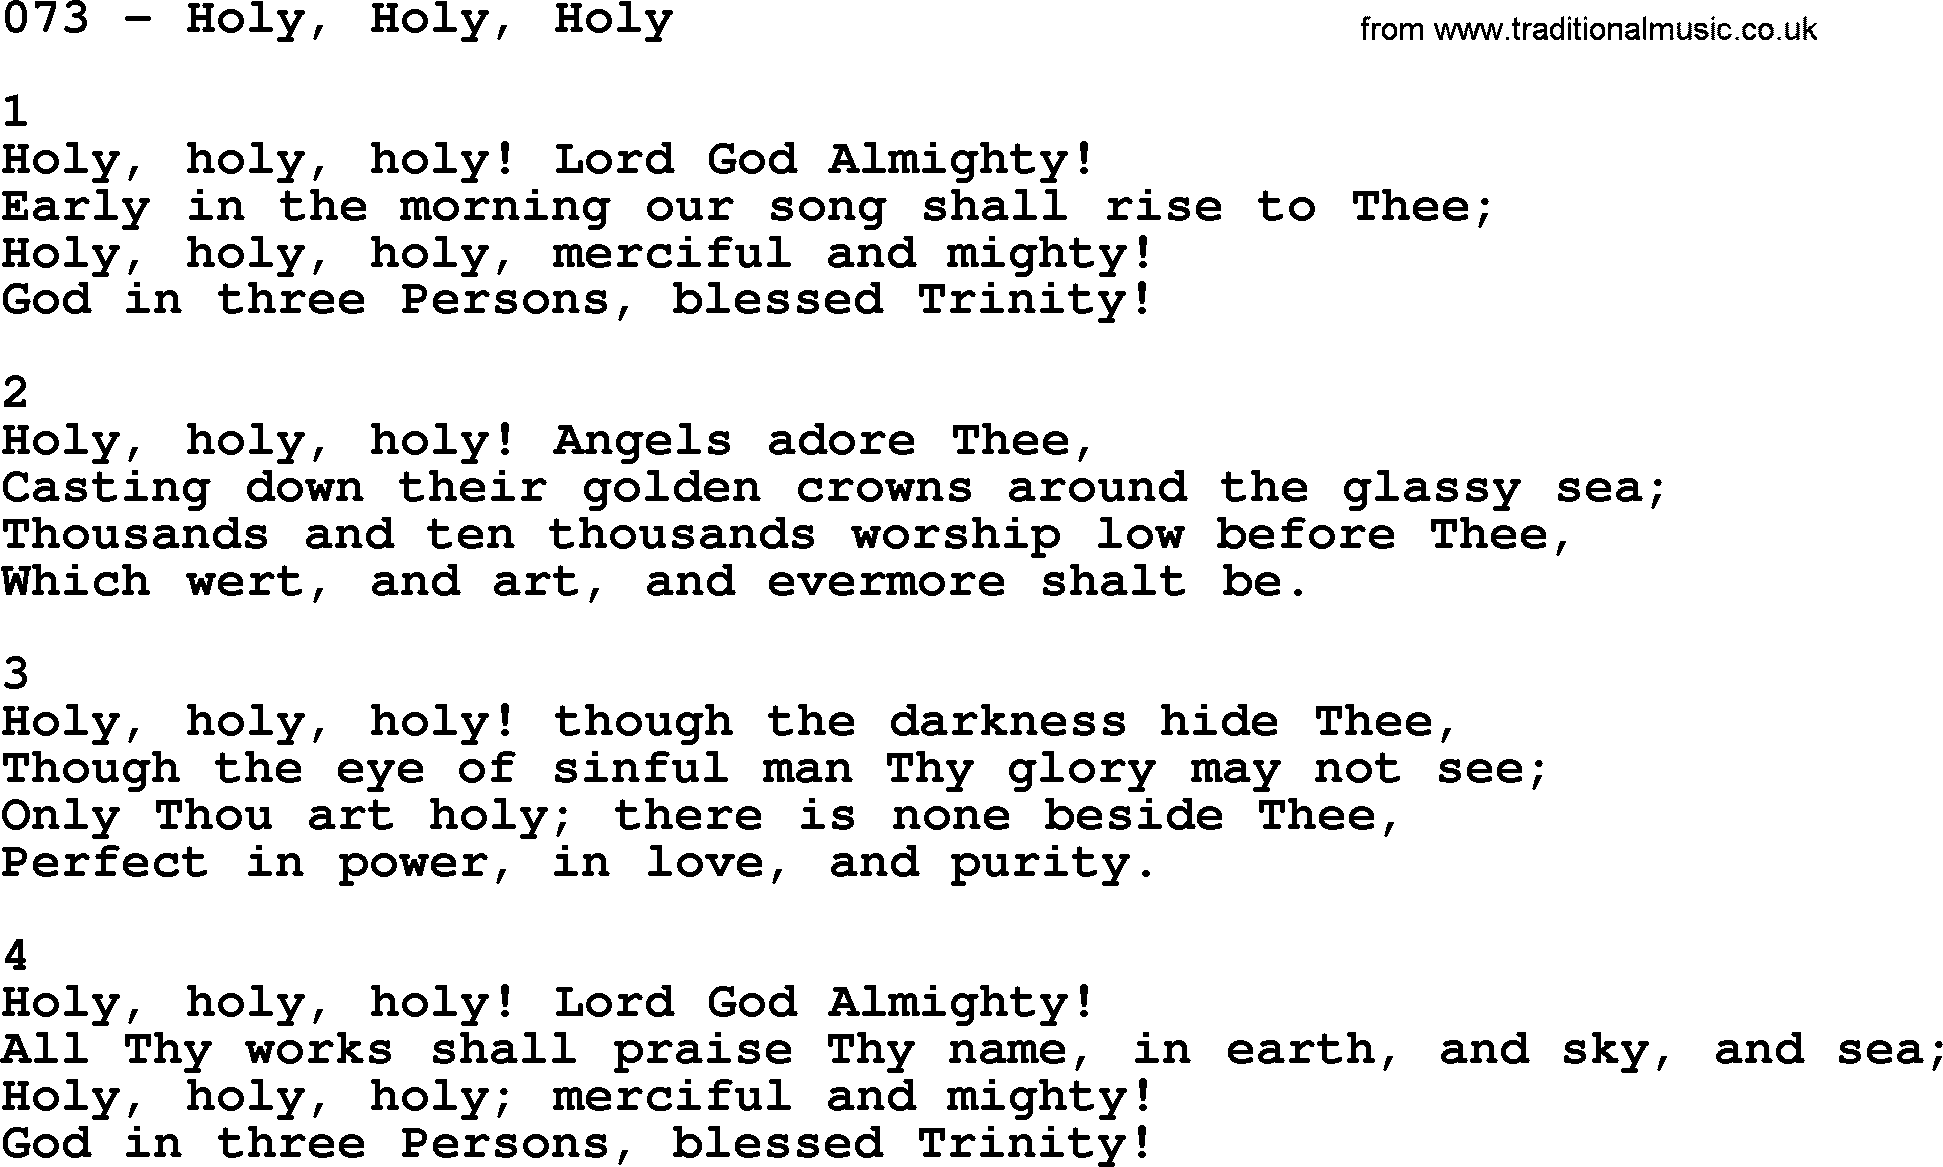 Complete Adventis Hymnal, title: 073-Holy, Holy, Holy, with lyrics, midi, mp3, powerpoints(PPT) and PDF,